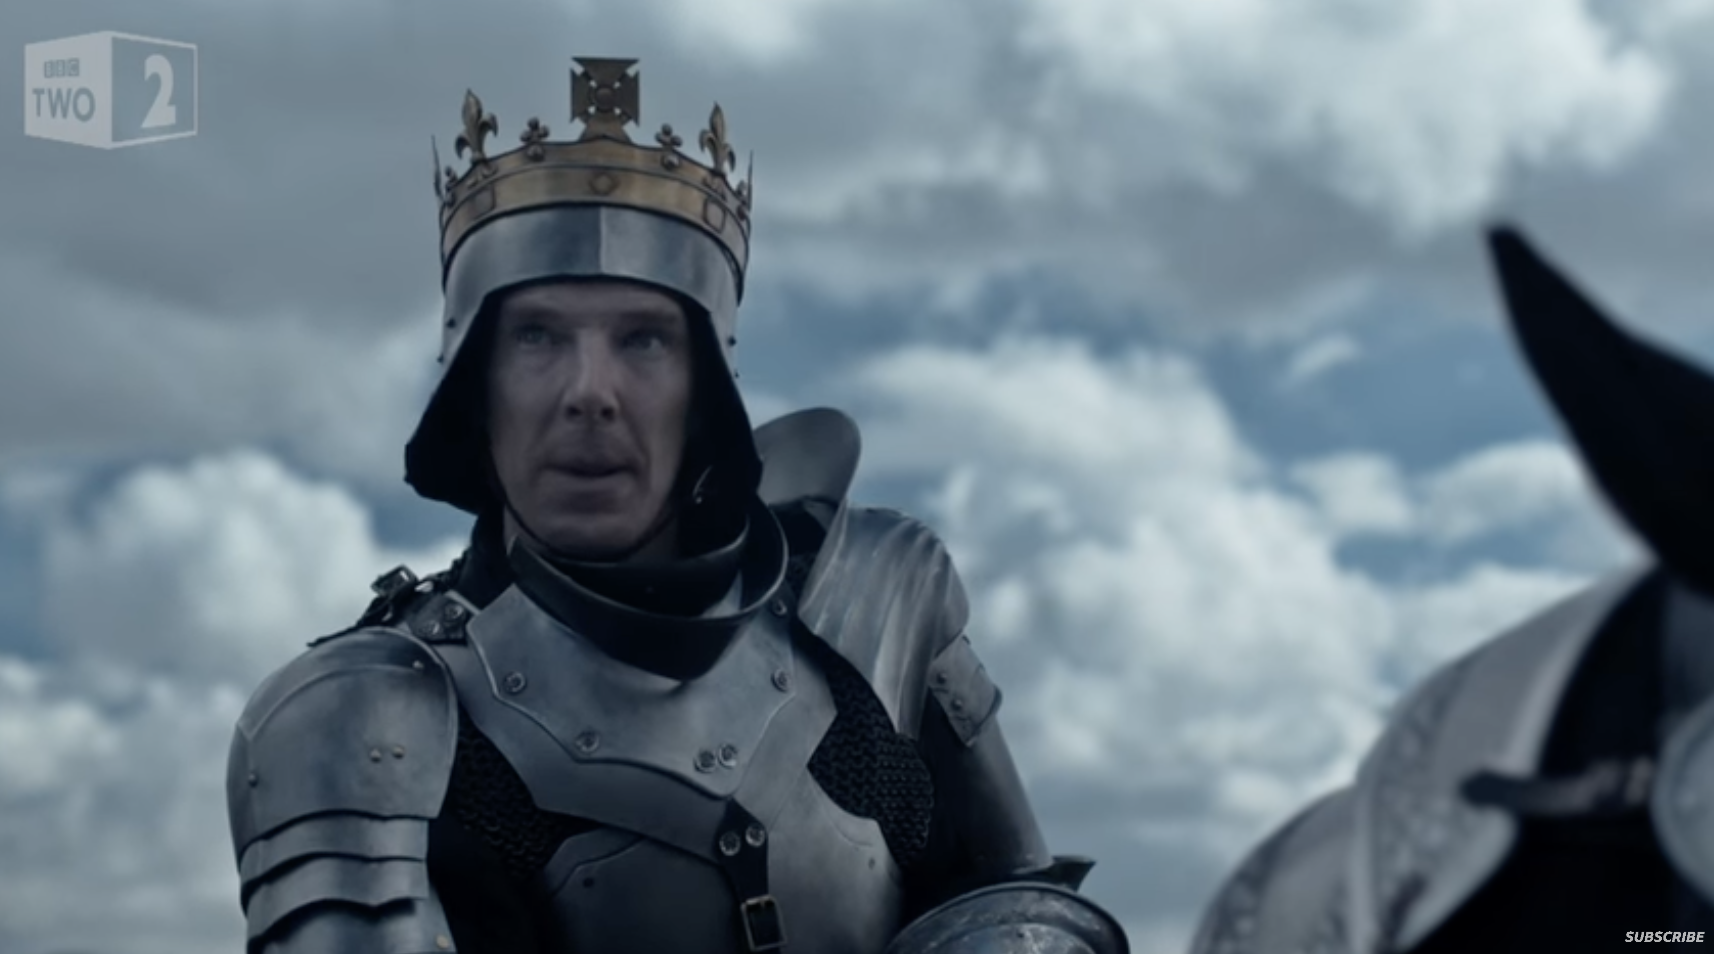 A screenshot of Benedict Cumberbatch portraying King Richard III, dressed in a suit of armor on a horse